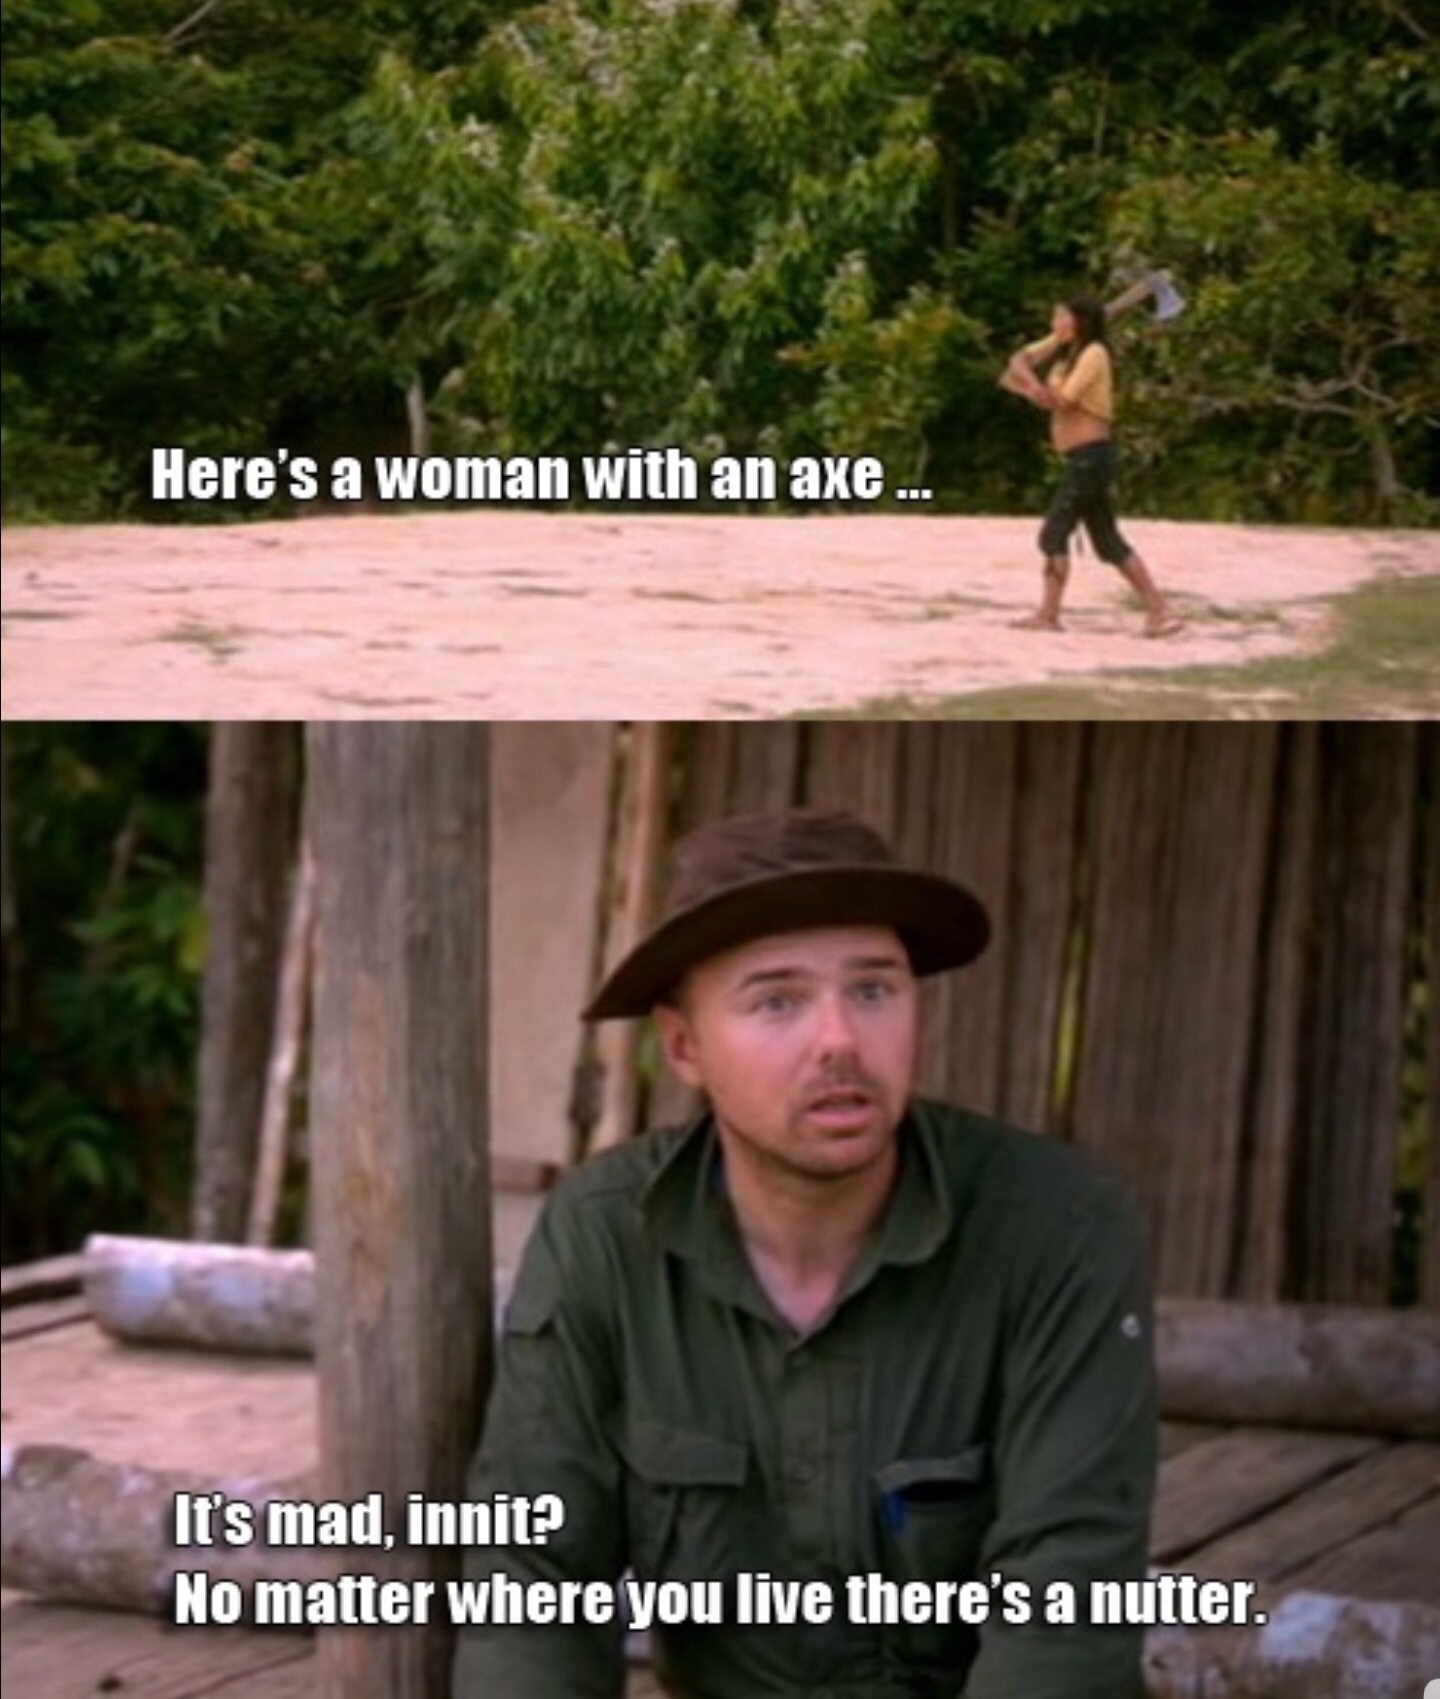 showerthoughts   - karl pilkington funny quotes - Here's a woman with an axe... It's mad, innit? No matter where you live there's a nutter.